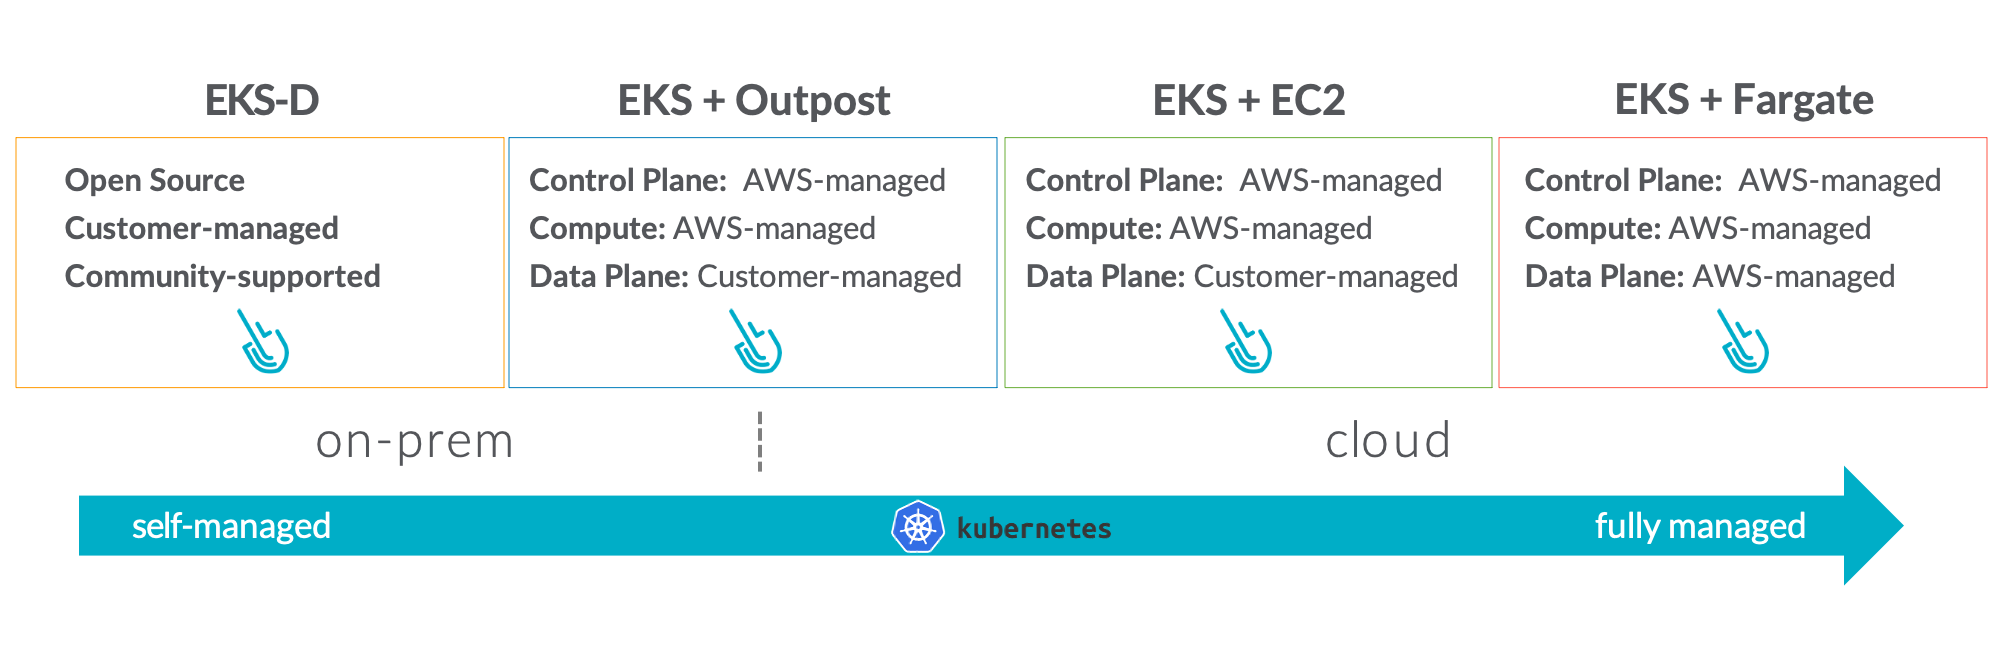 How EKS-D fits with Kubernetes solutions from AWS